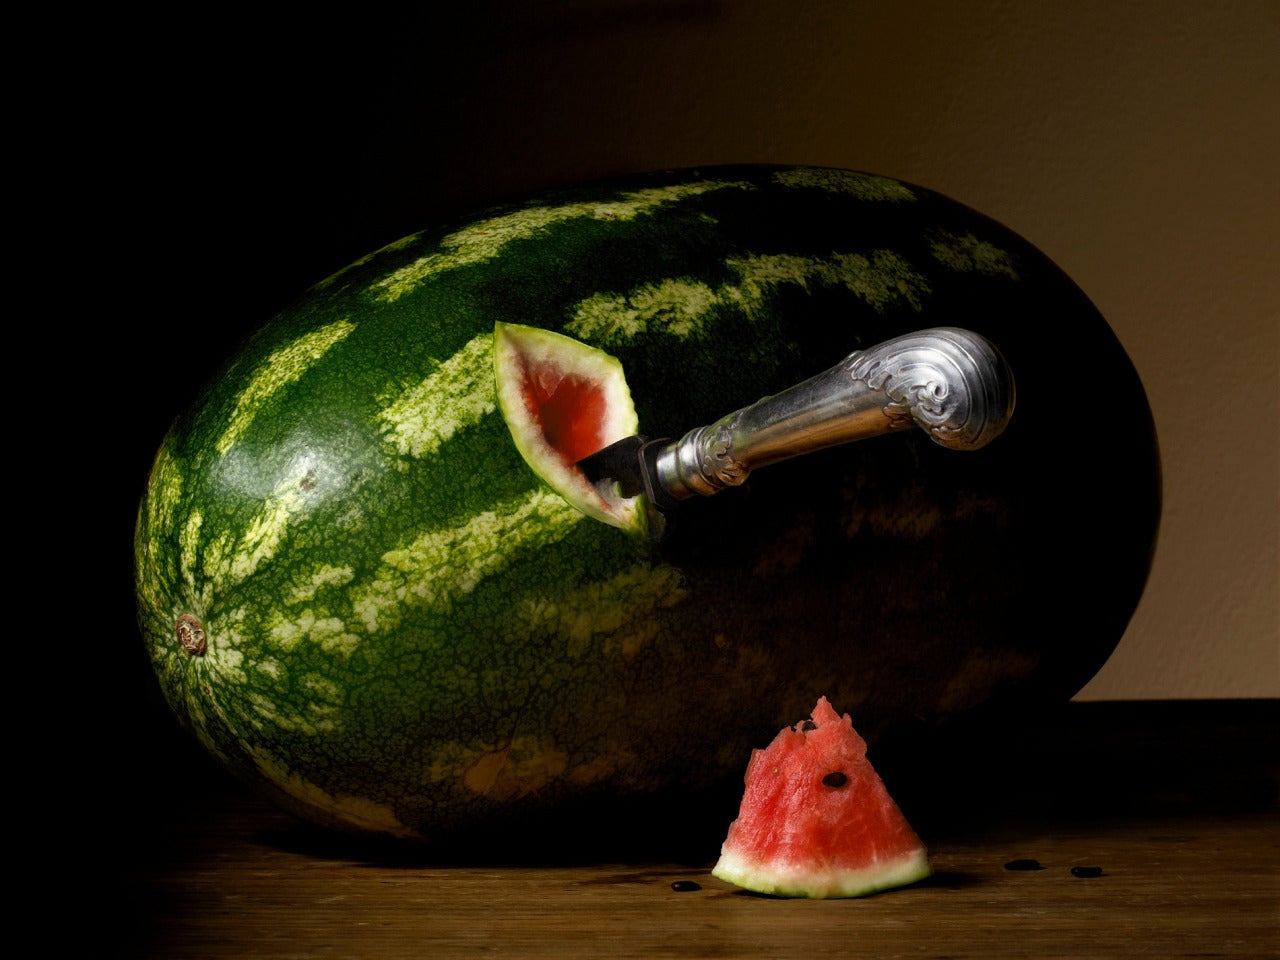 The First Cut by Robyn Stacey features a large watermelon sitting on a wooden table in this dramatically lit still-life. The handle of a silver knife protrudes out from a cut in the fruit. A chunk of watermelon sits next to the larger fruit below